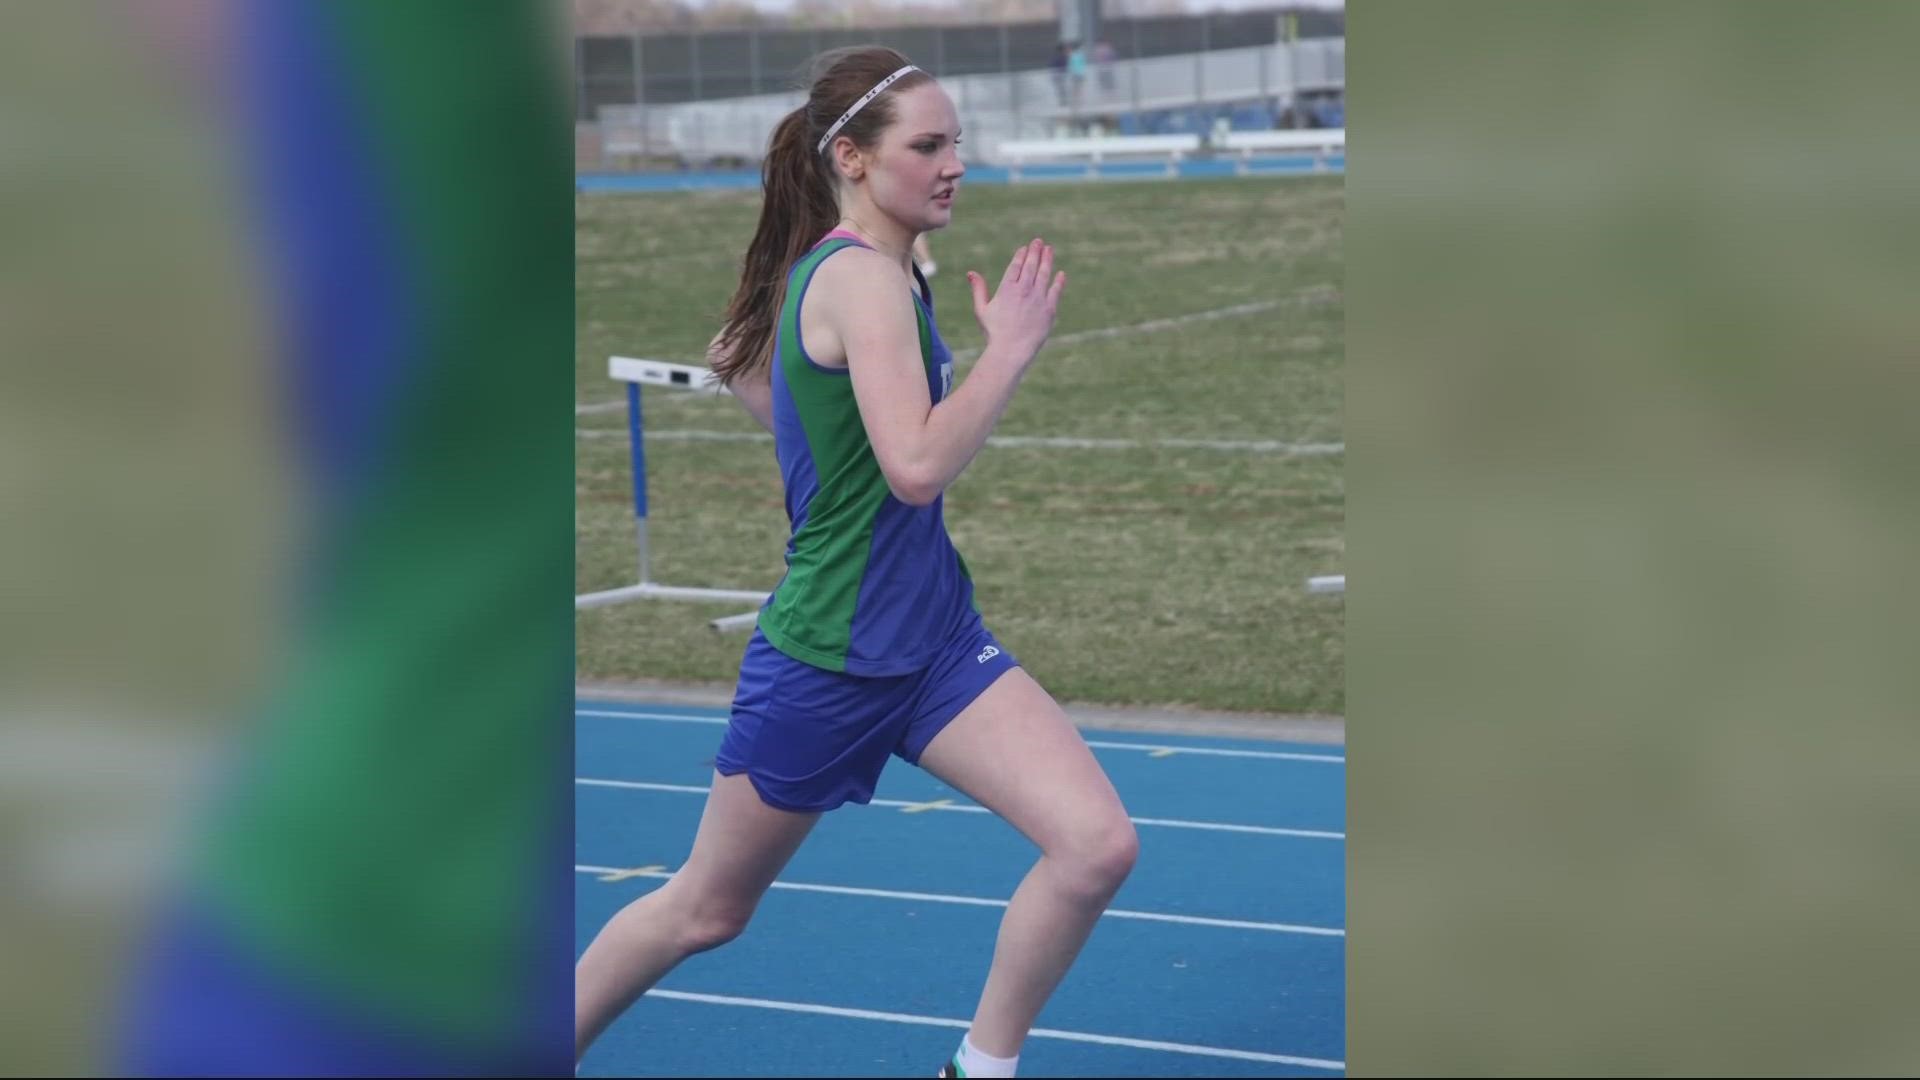 The parents of a Jacksonville University student who committed suicide are suing the school and its former track and cross-country coach.